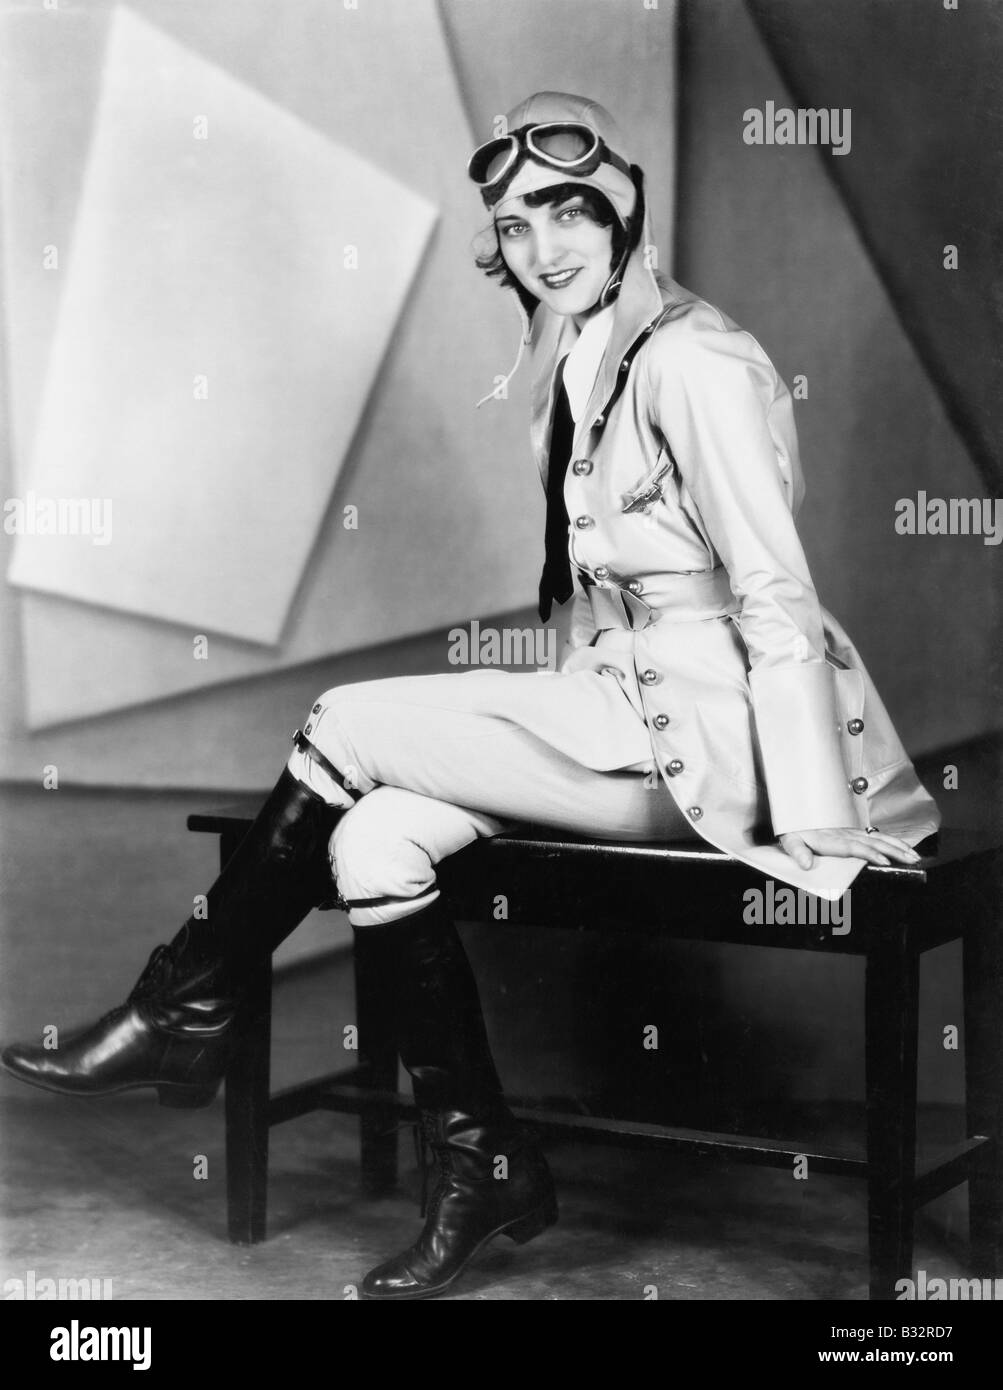 Woman sitting on a bench in a pilots uniform Stock Photo